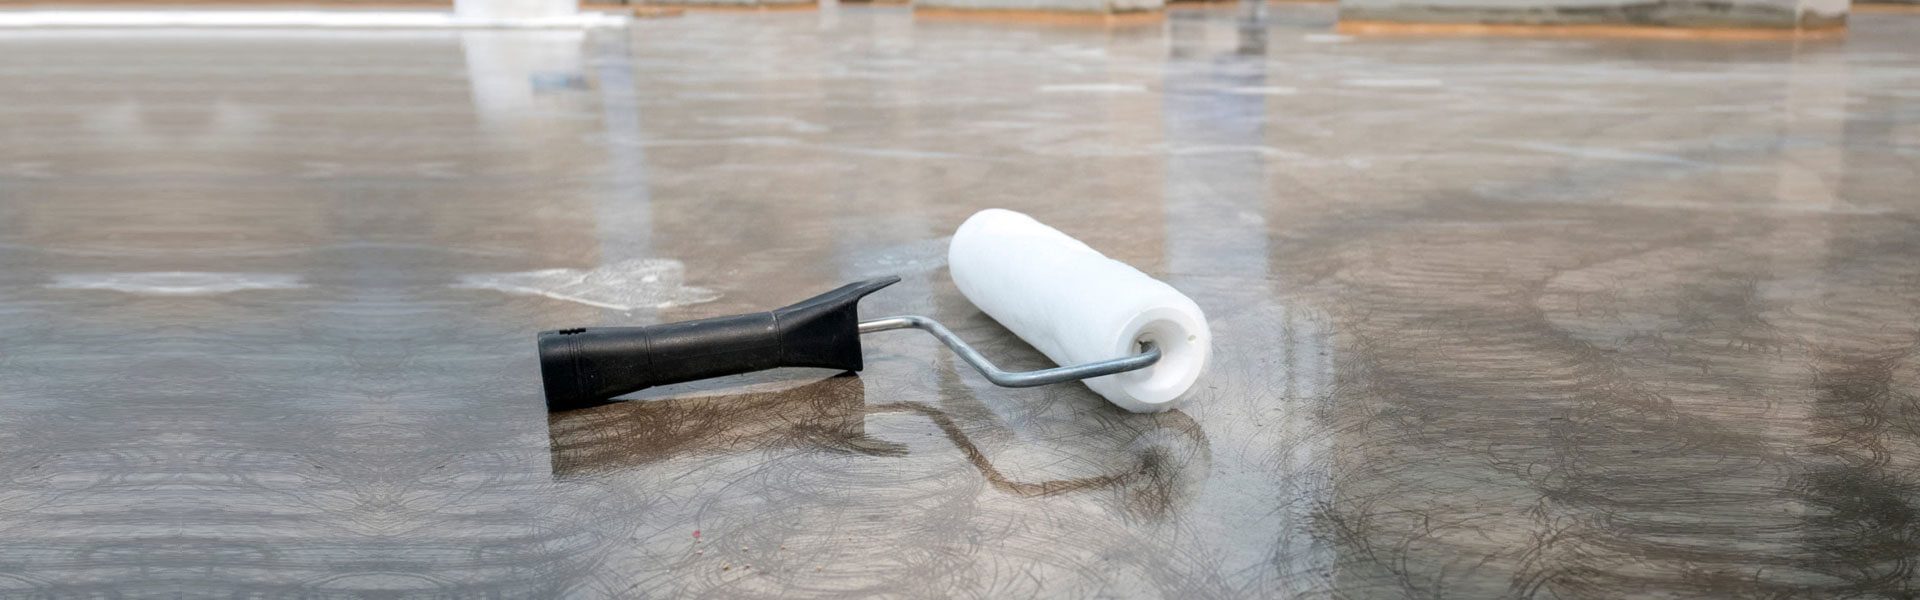 Choosing The Best Epoxy Floor Coating for Your Home